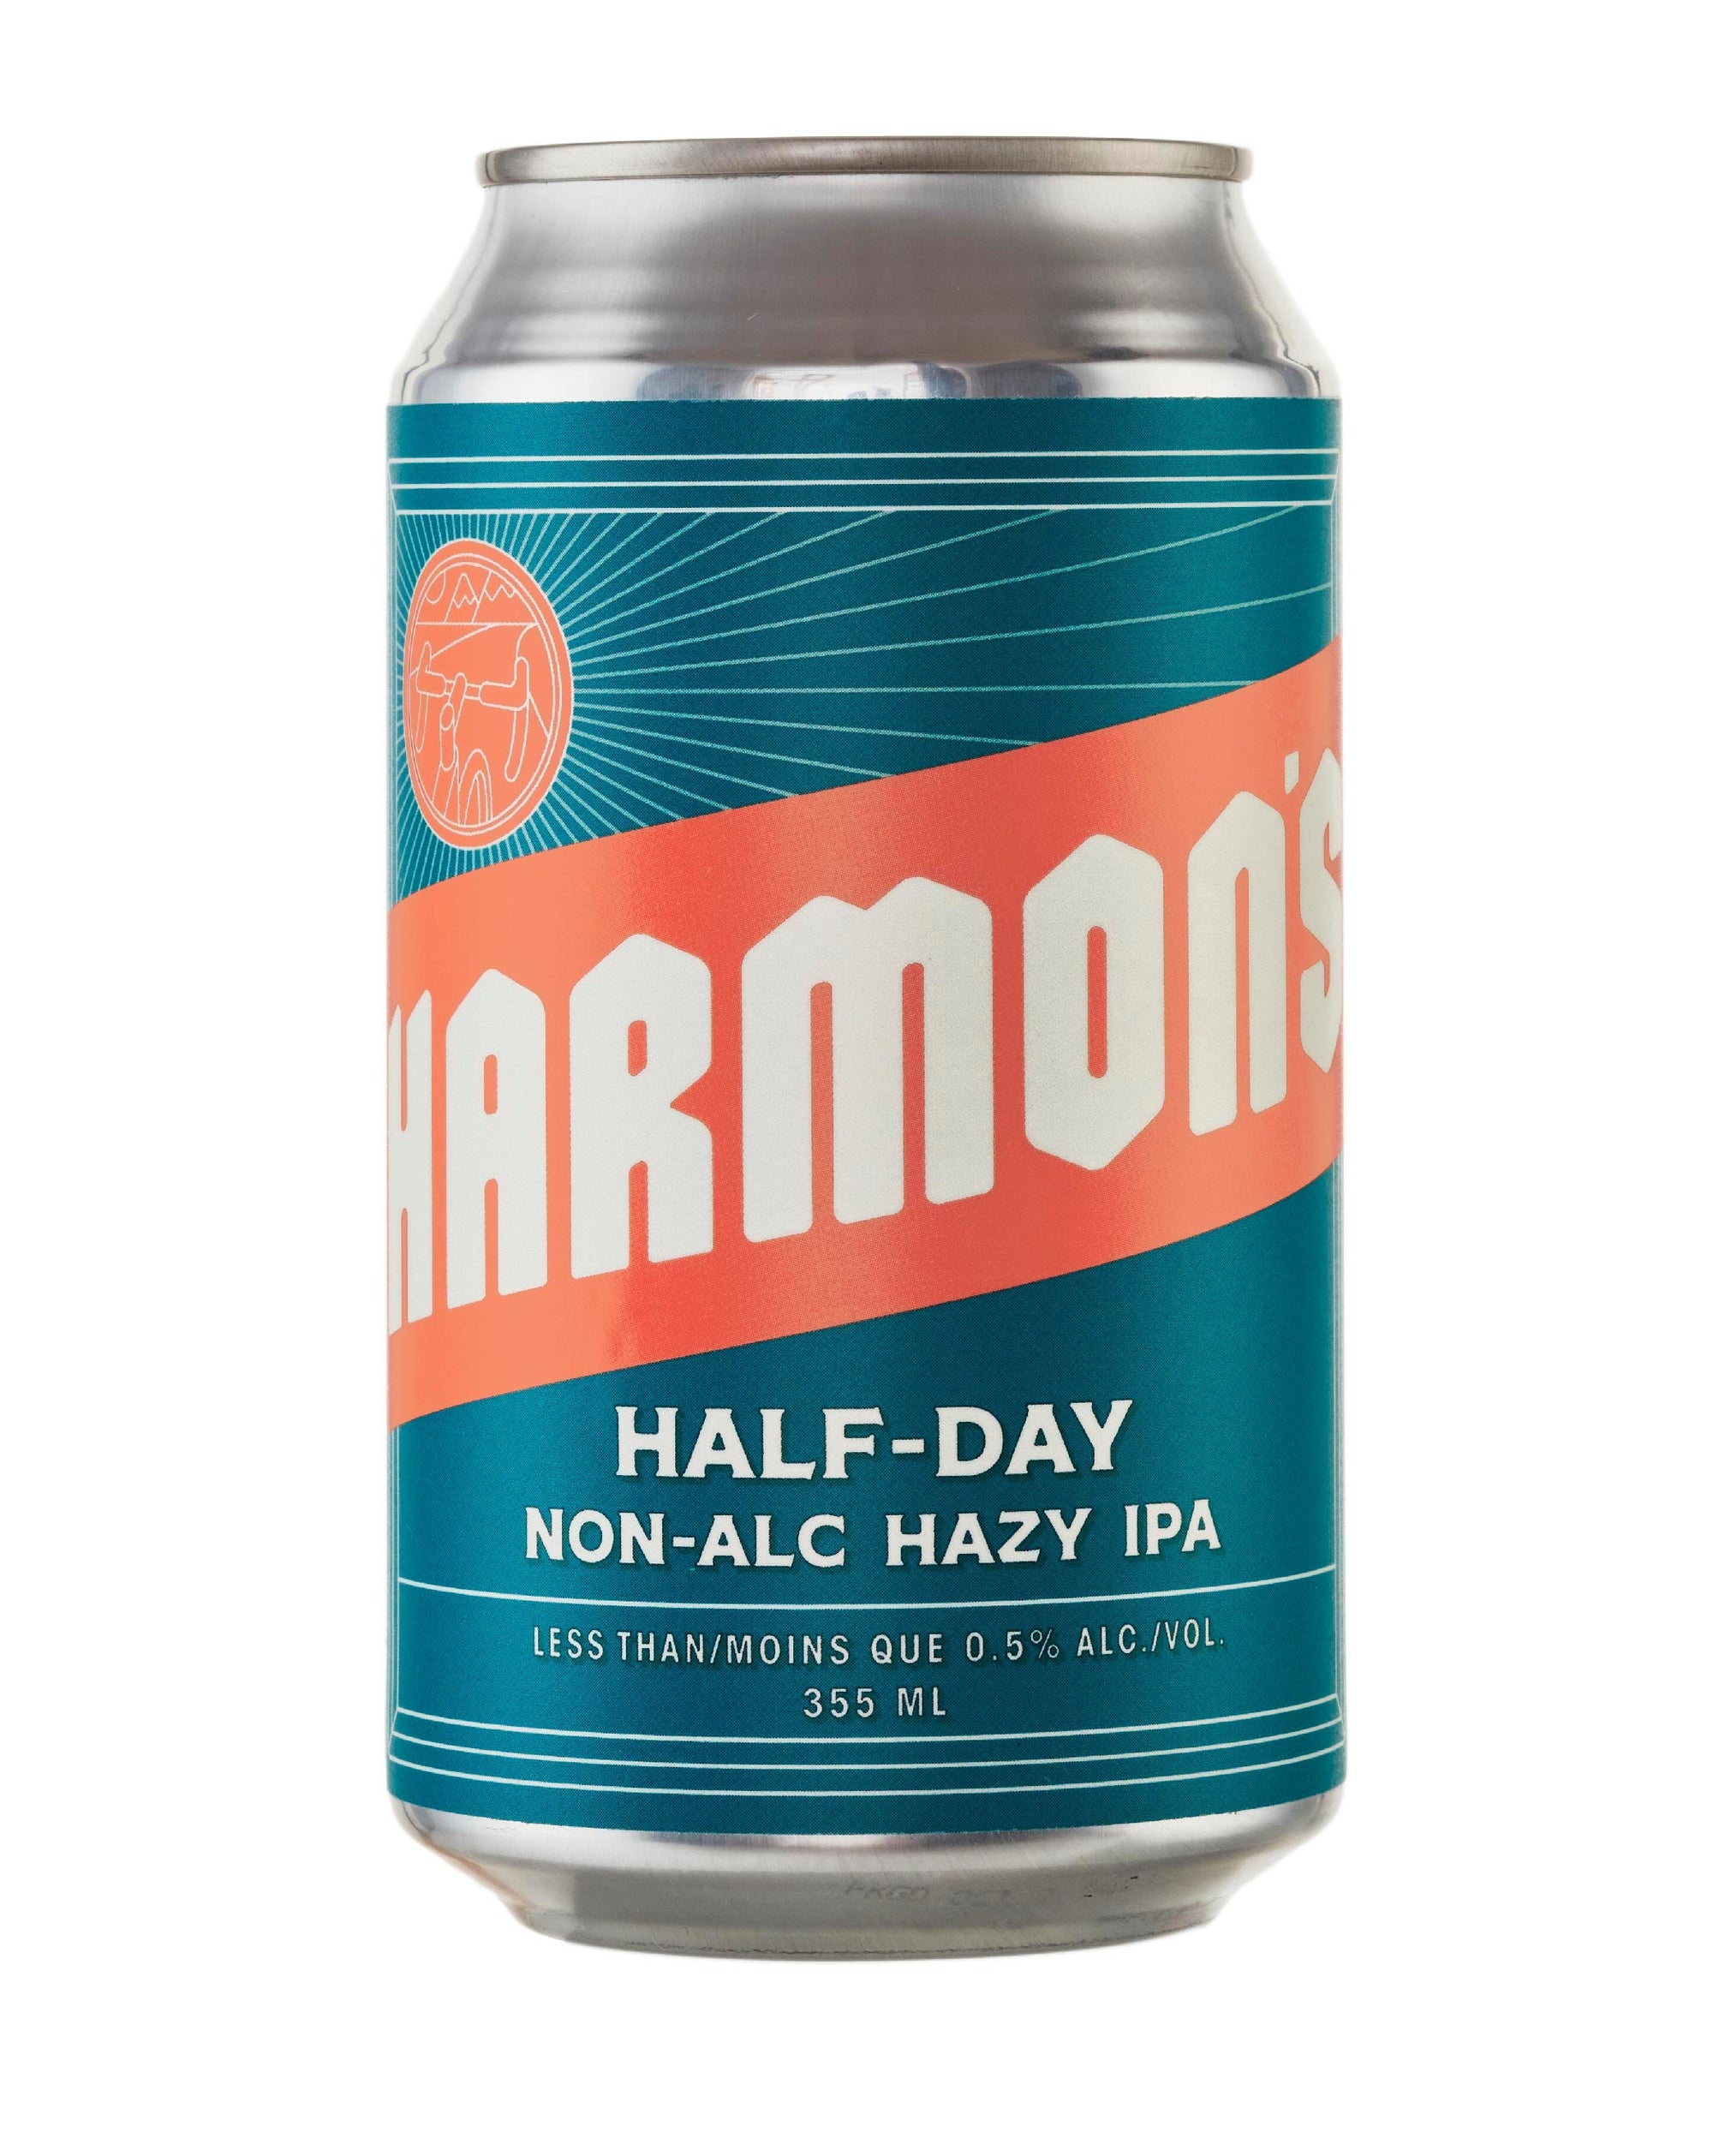 A can of Harmon's non-alcoholic IPA made in Canada